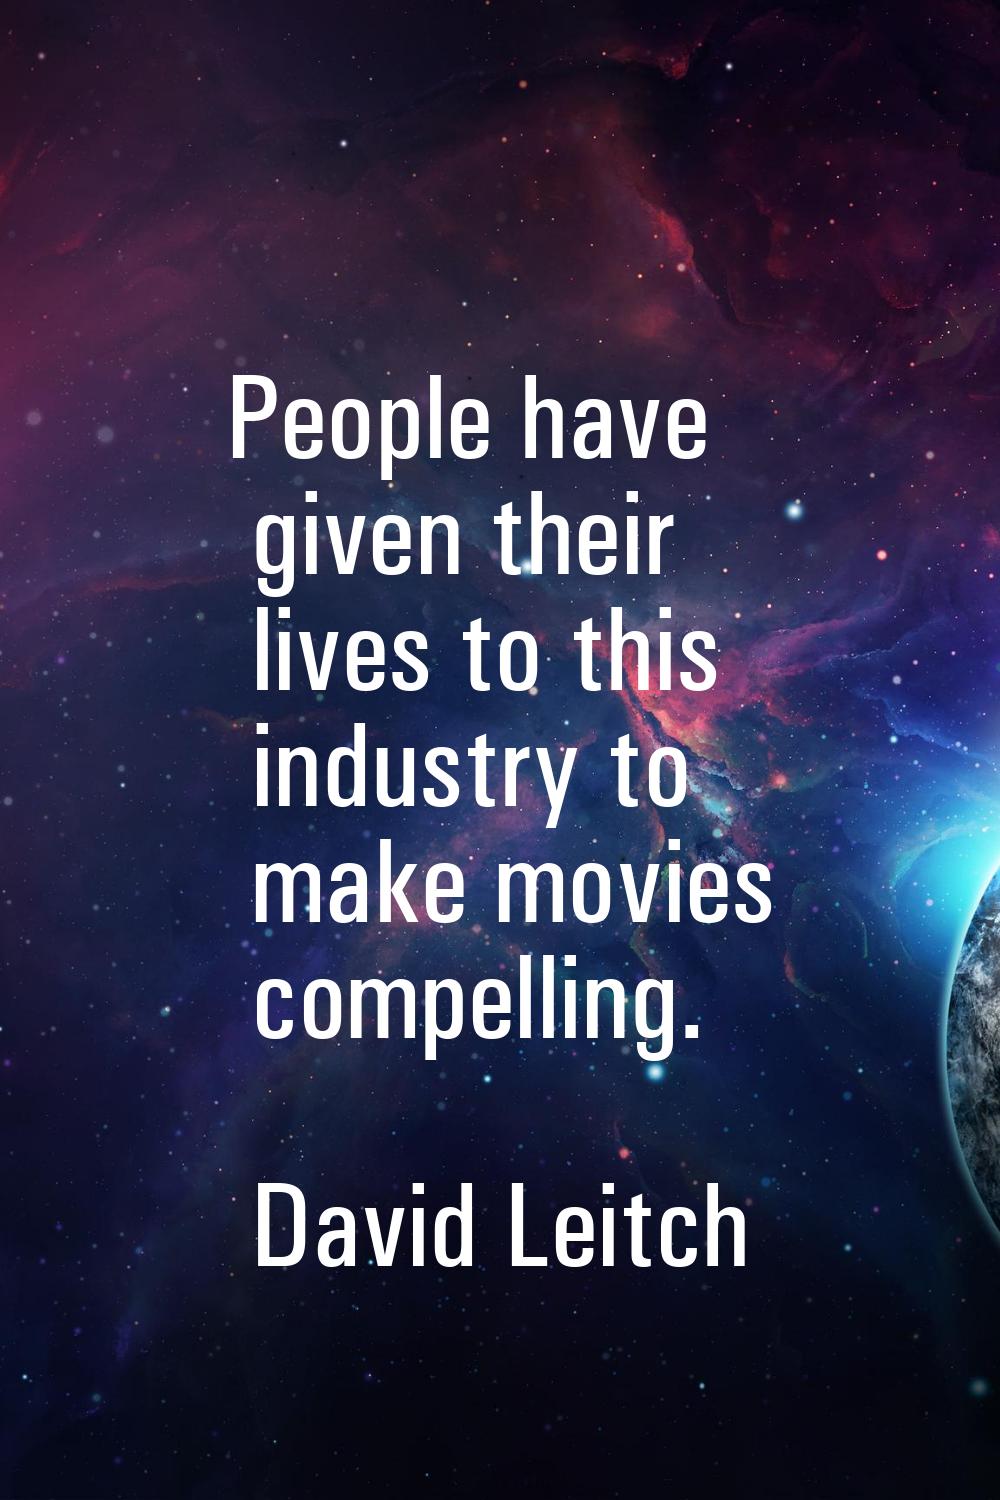 People have given their lives to this industry to make movies compelling.